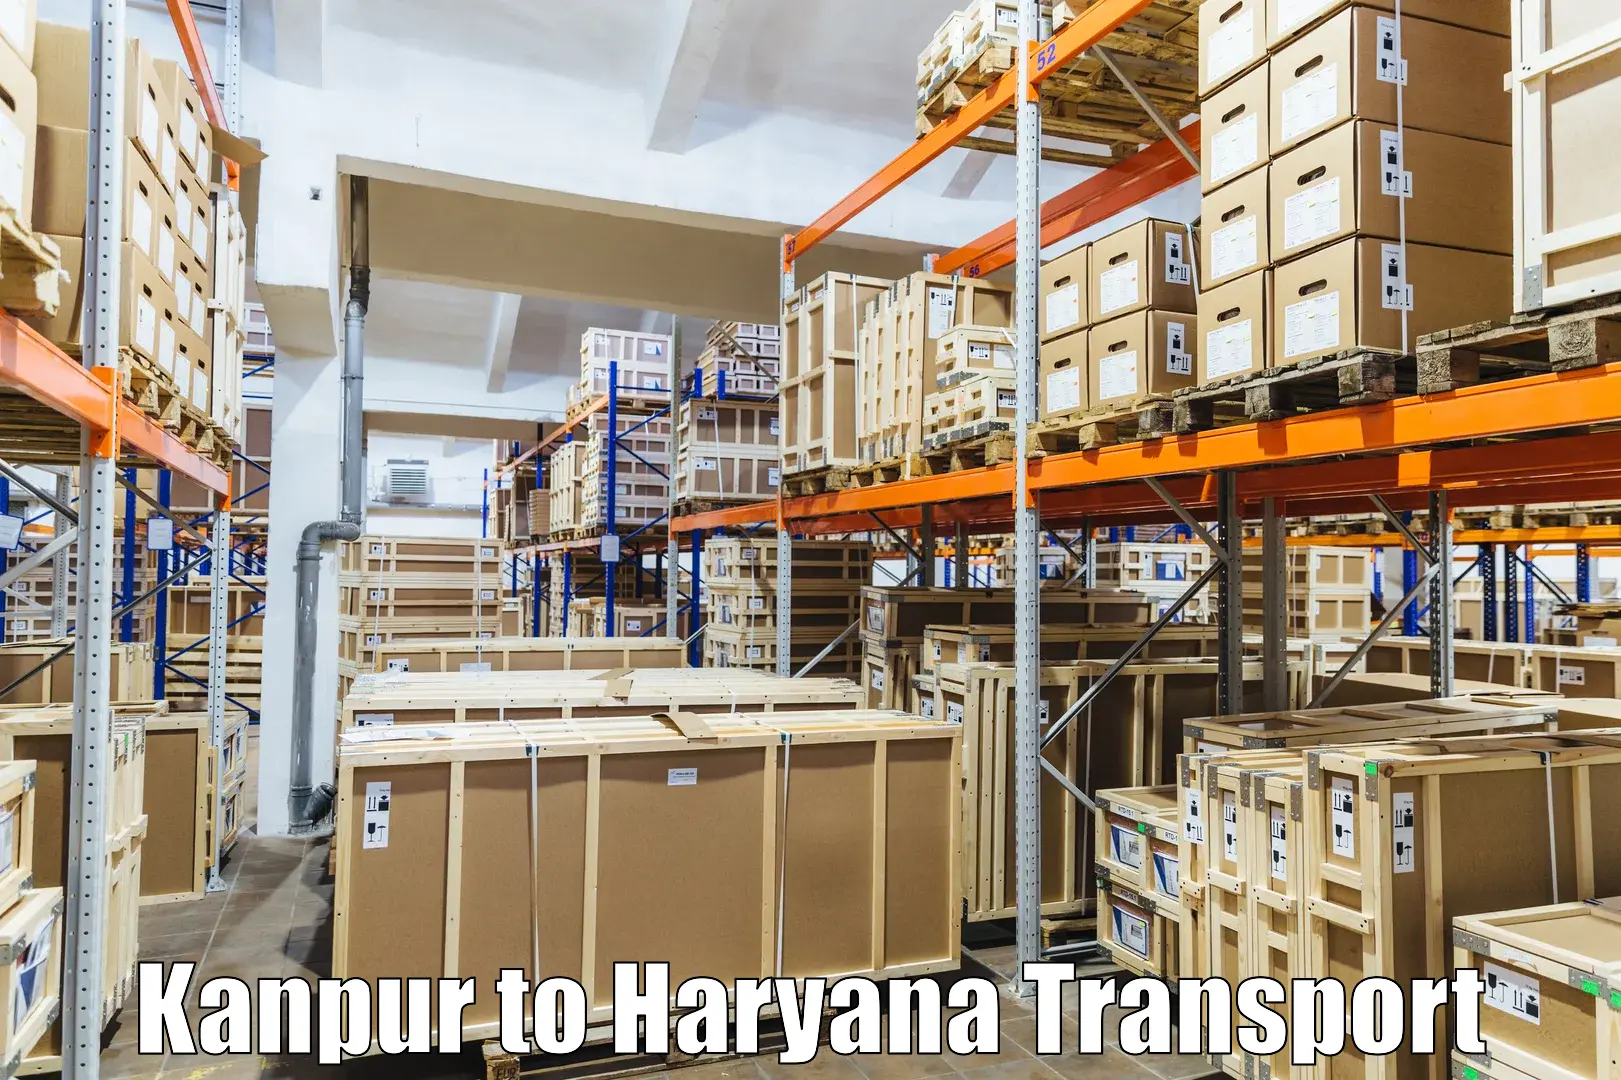 Road transport services Kanpur to Sonipat